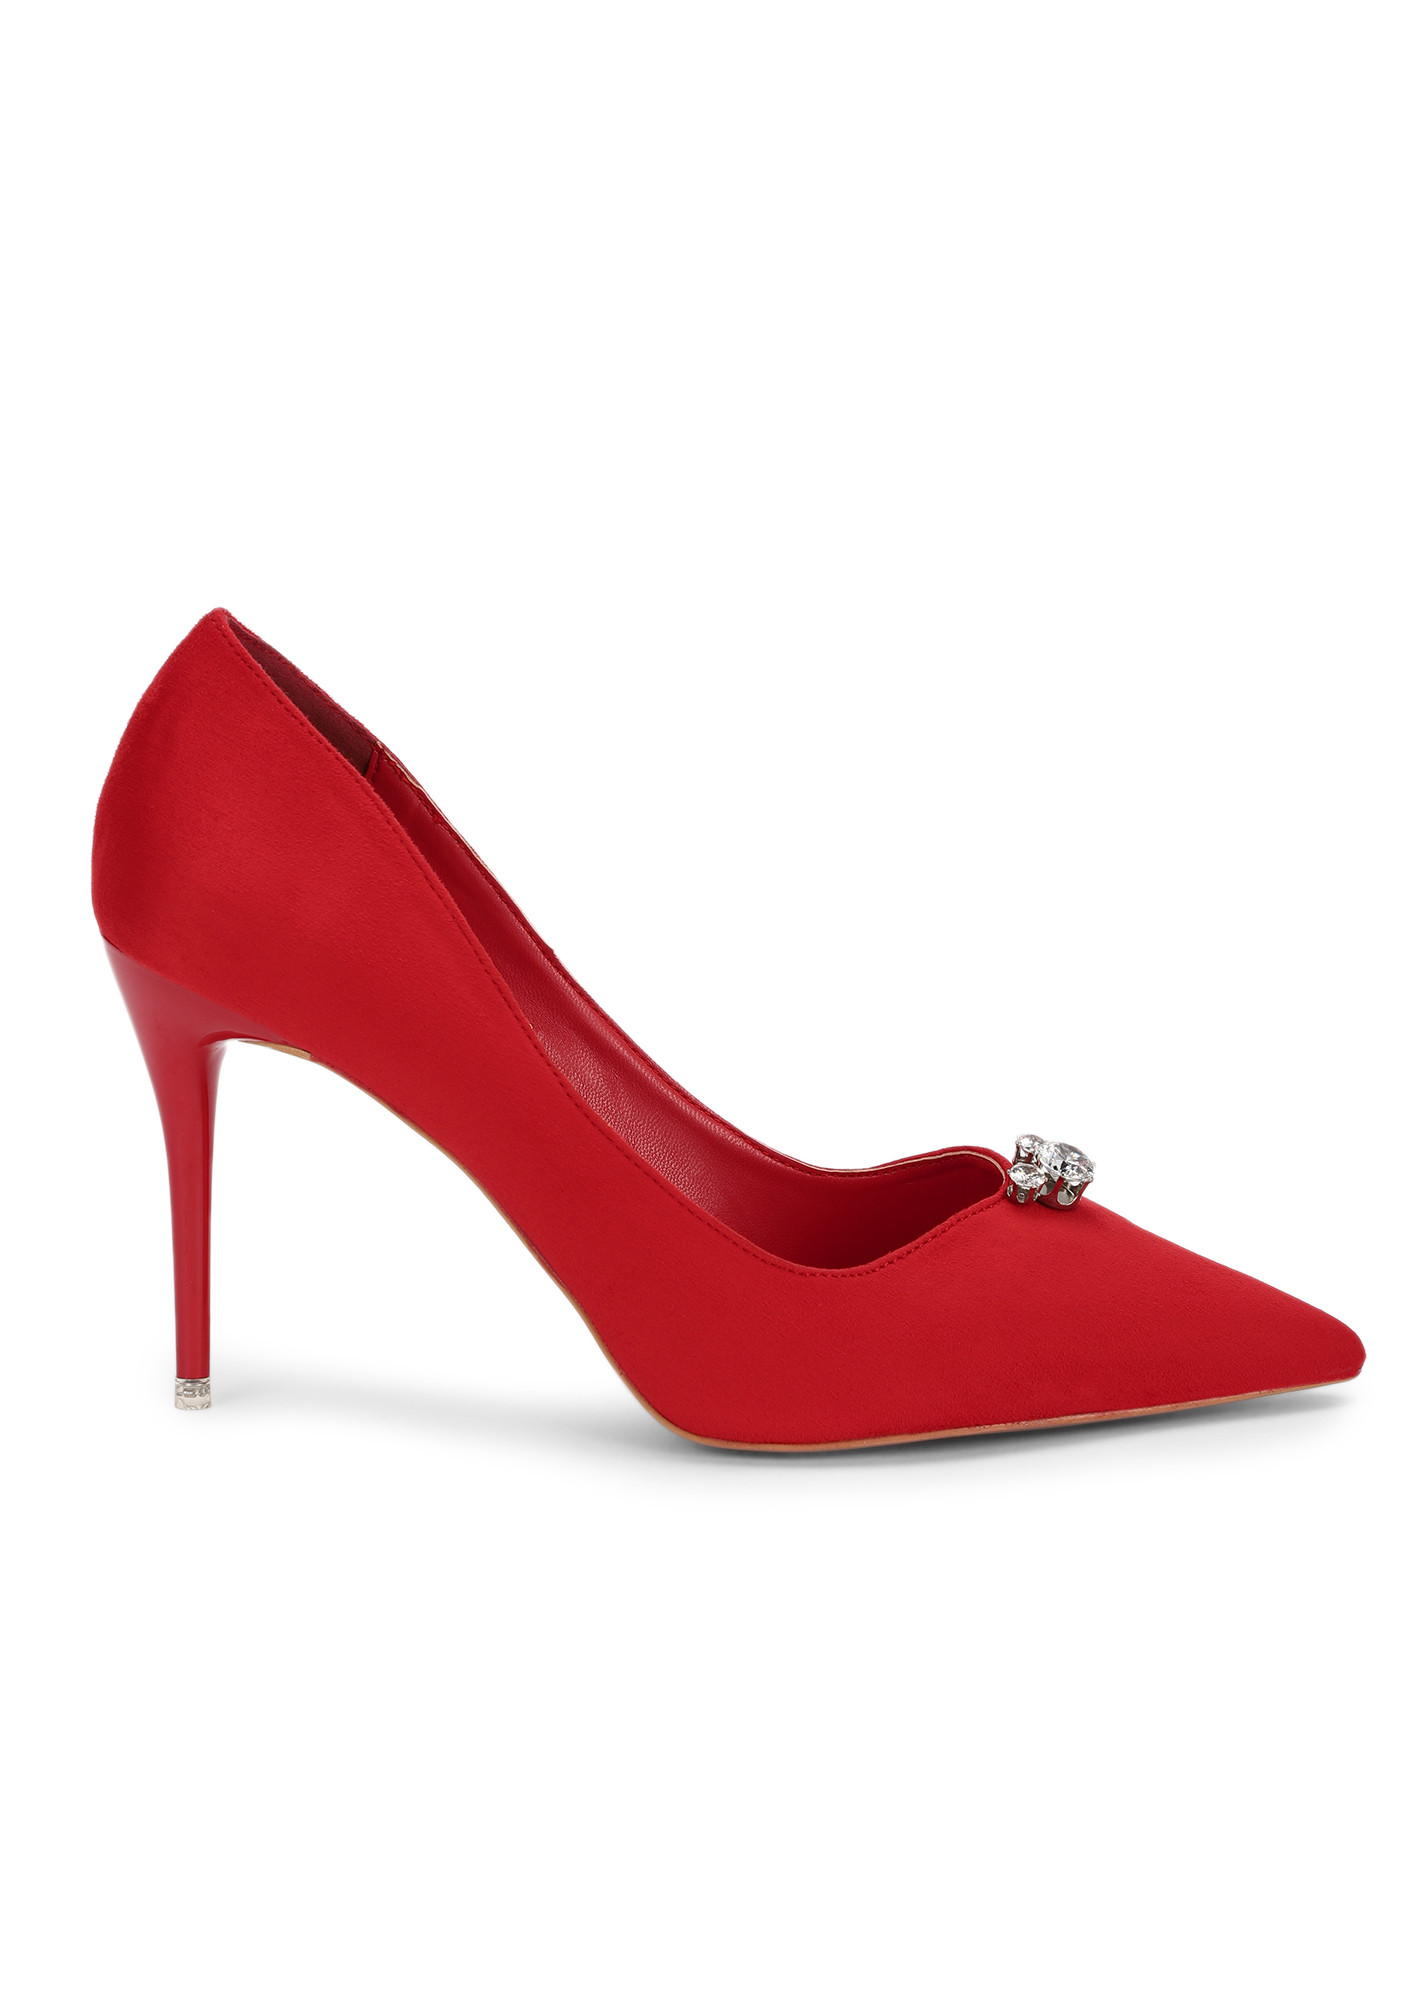 PARTY FAVOR RED HEELED SHOES